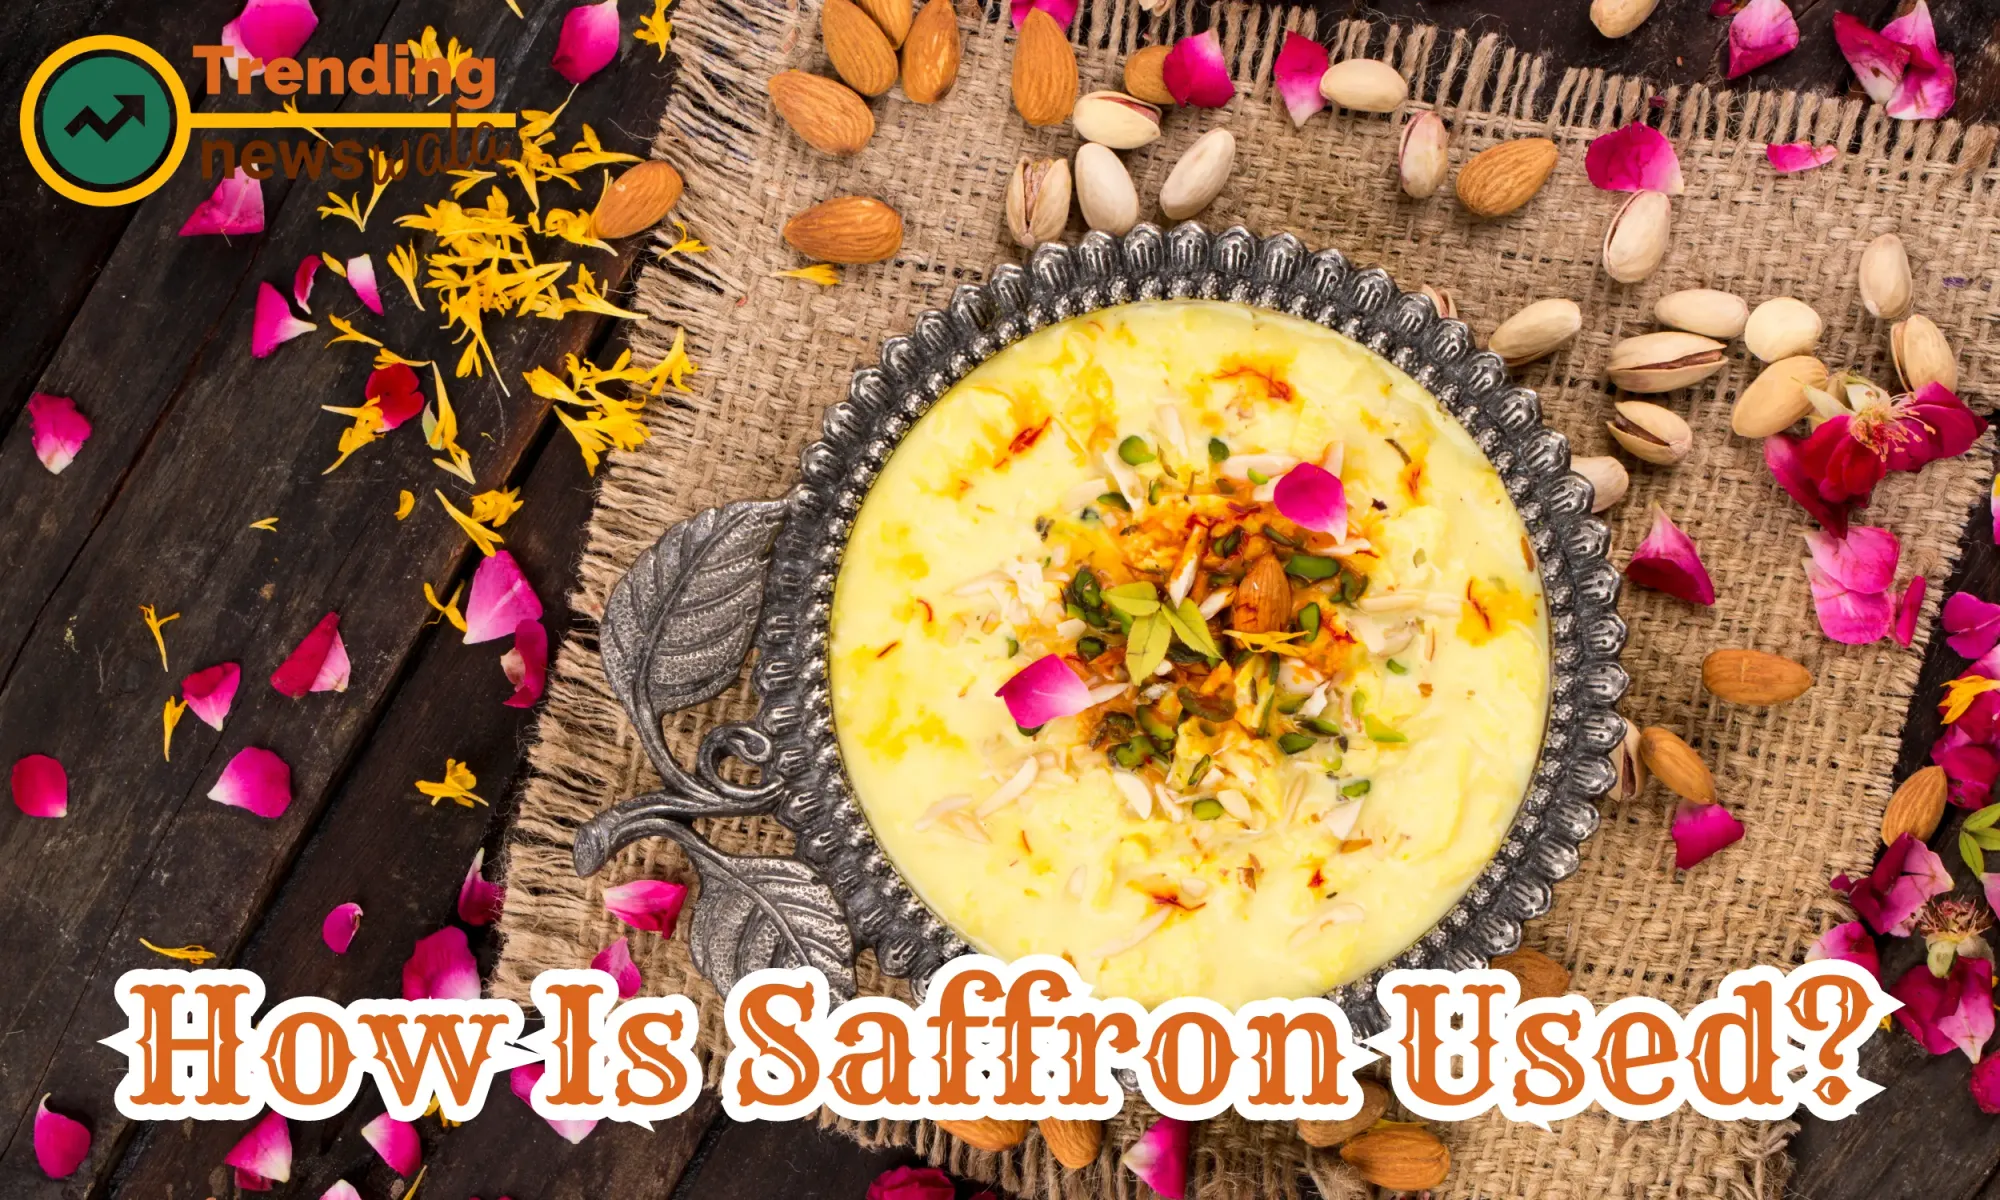 Saffron is a versatile spice used in both sweet and savory dishes.